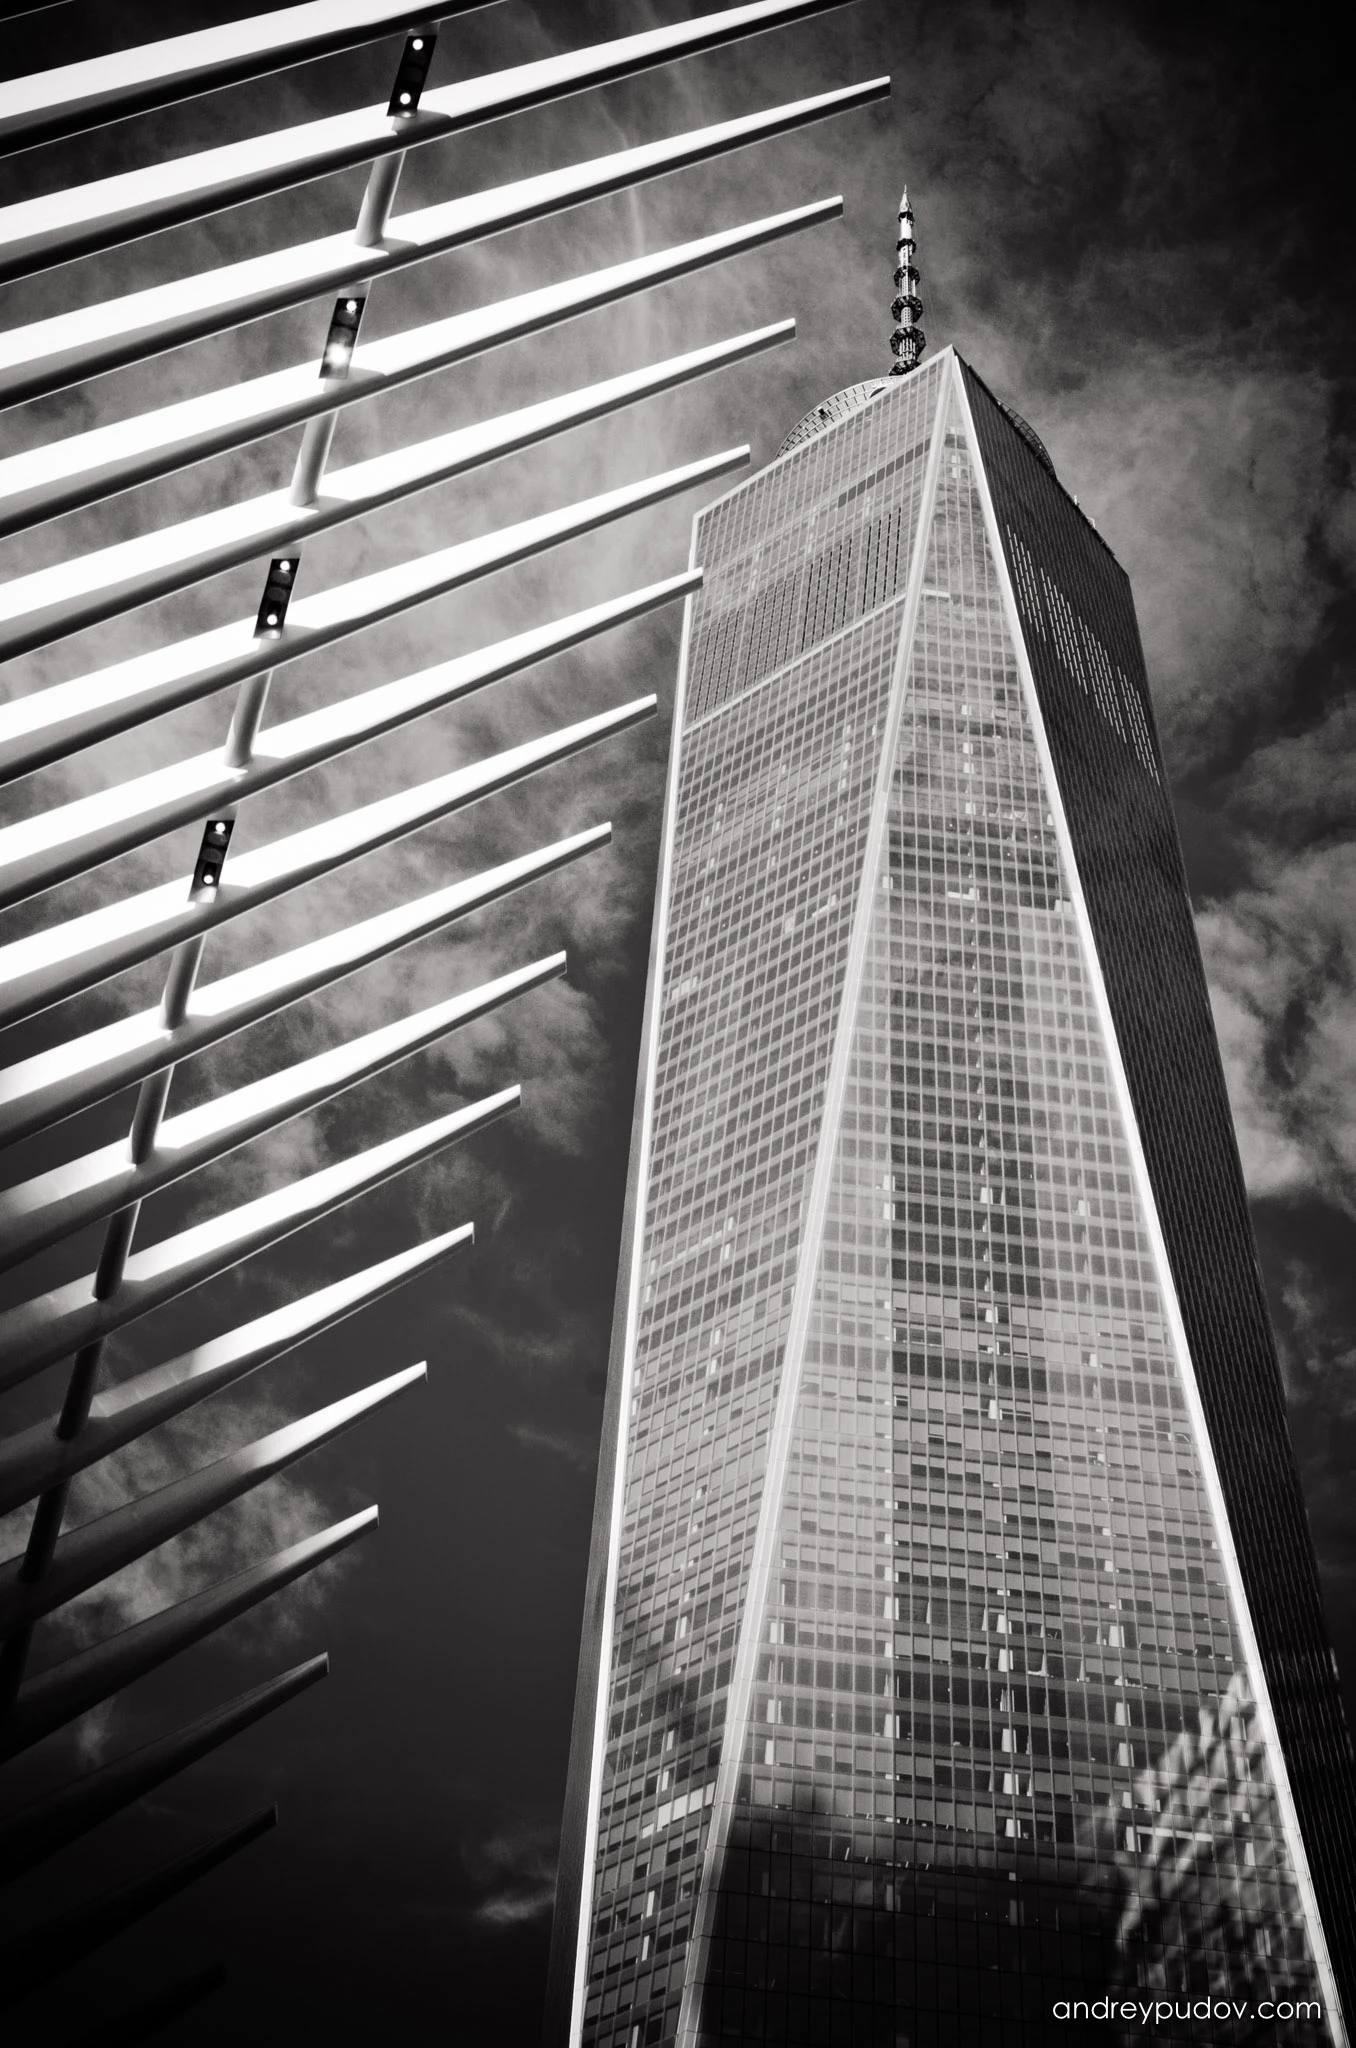 Favorite Photographs - One World Trade Center

One World Trade Center is the main building of the rebuilt World Trade Center complex in Lower Manhattan. One WTC is the tallest building in the United States, the tallest building in the Western Hemisphere, and the seventh-tallest in the world. The supertall structure has the same name as the North Tower of the original World Trade Center, which was destroyed in the terrorist attacks of September 11, 2001. The new skyscraper stands on the northwest corner of the 6.5 ha World Trade Center site, on the site of the original 6 World Trade Center.